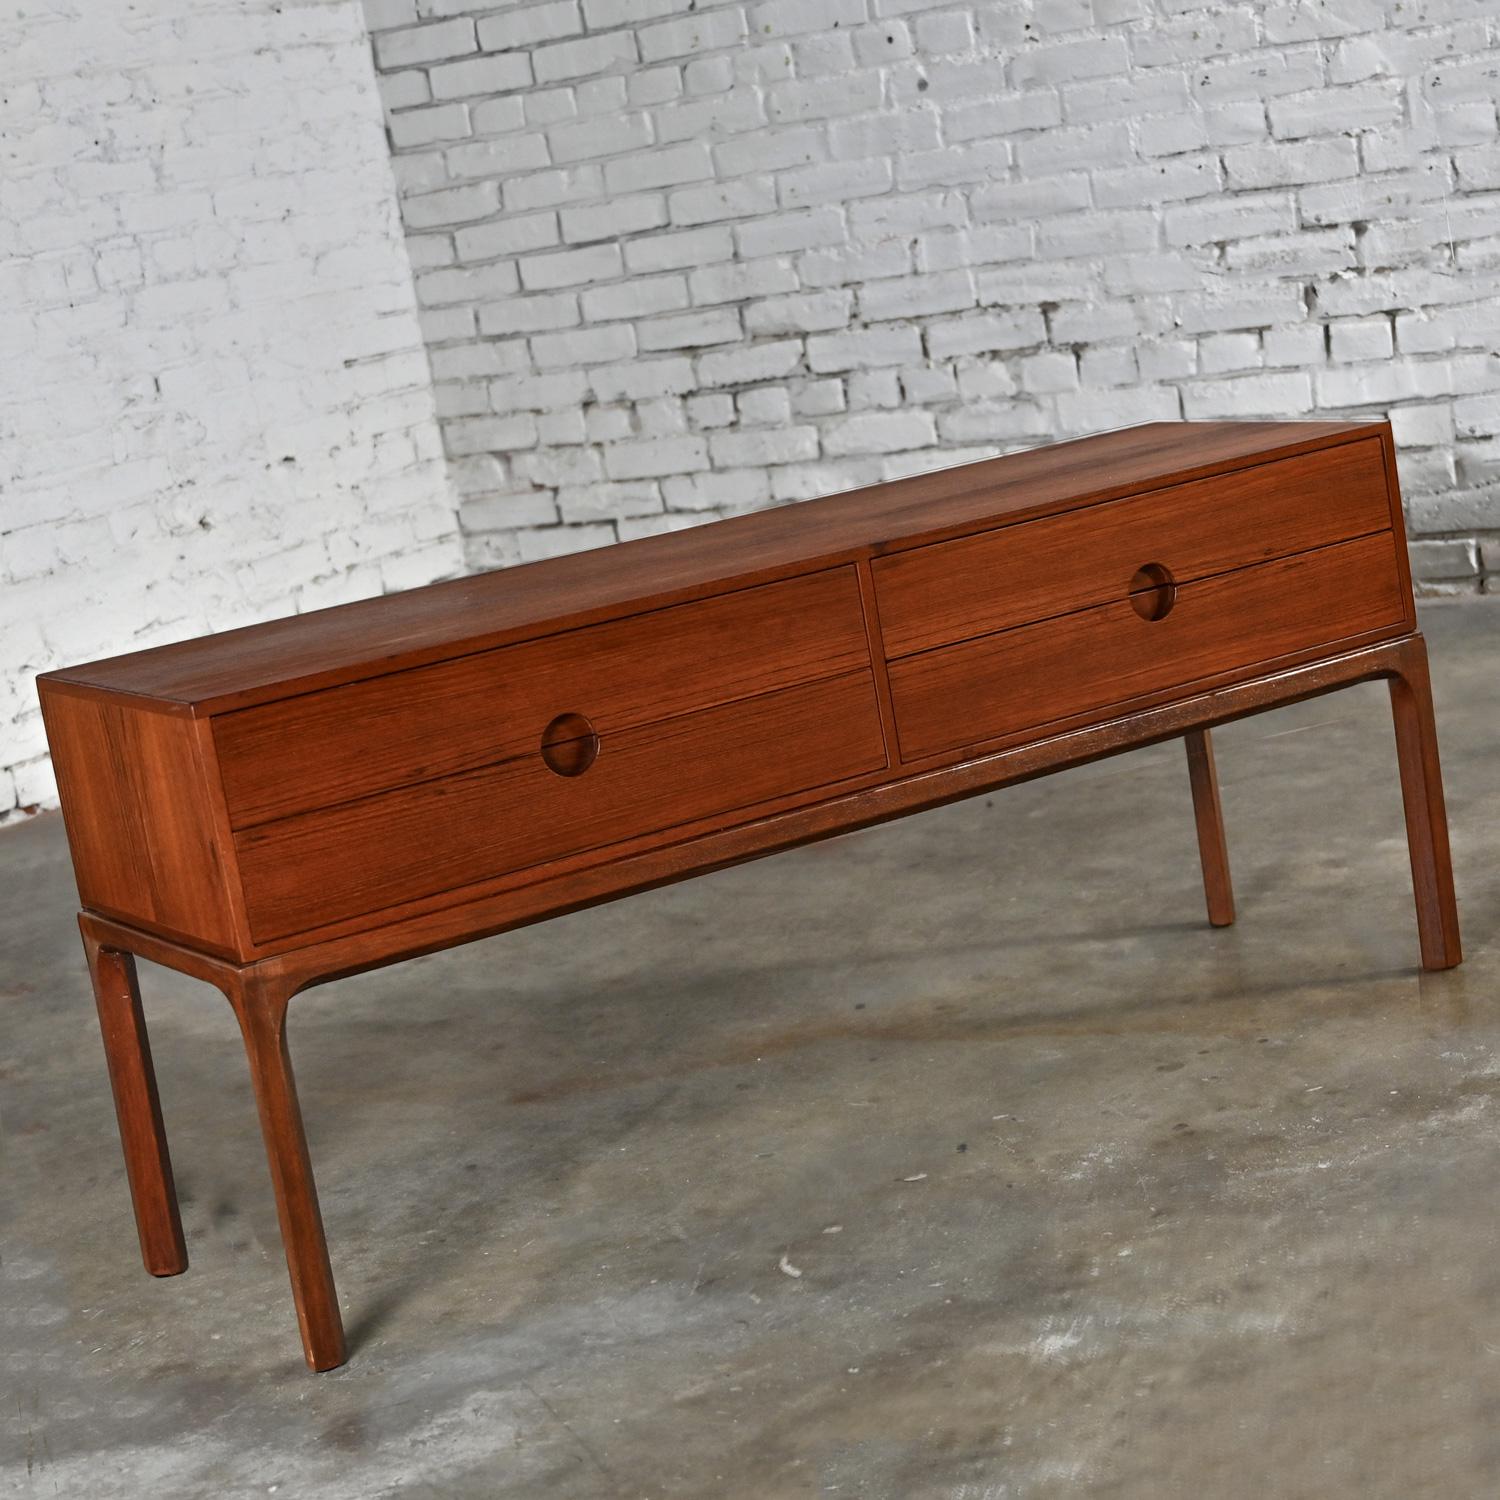 Incredible 1950-1960’s Scandinavian Modern teak 4 drawer low cabinet sideboard (or bench) Model #394 by Kai Kristiansen for Aksel Kjersgaard Odder. This piece has been attributed based upon its stamped mark, archived research including online